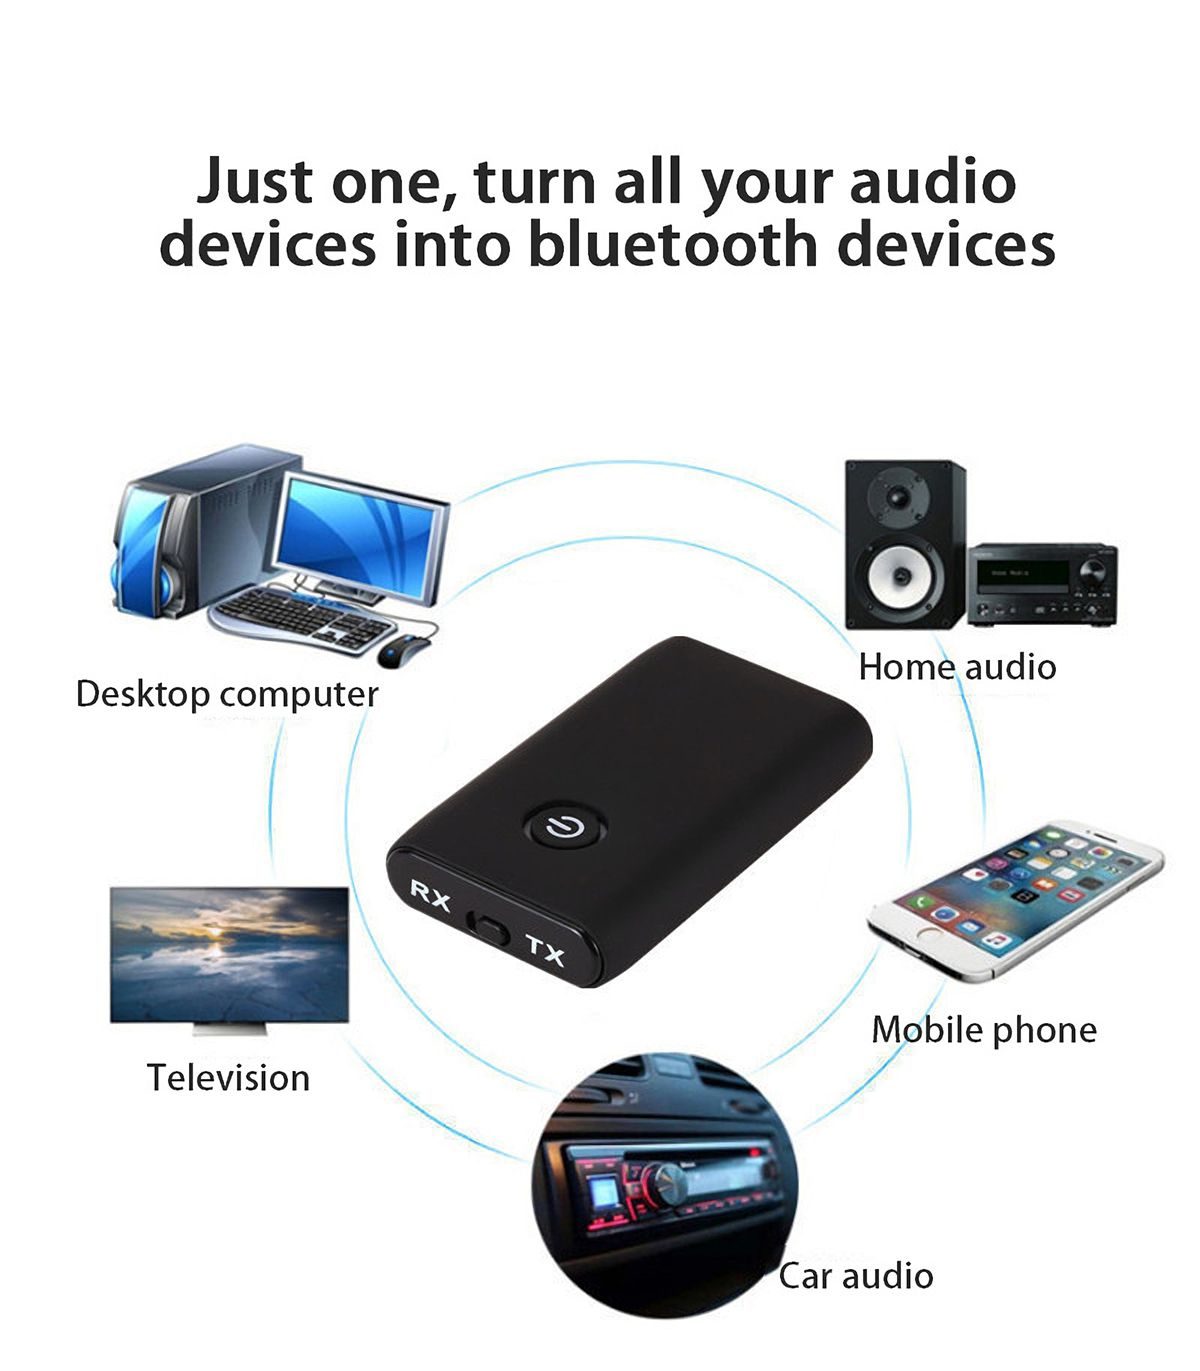 GRWIBEOU-2-in1-bluetooth-50-Adapter-Wireless-bluetooth-Transmitter-Receiver-AUX-35mm-Audio-for-Compu-1760799